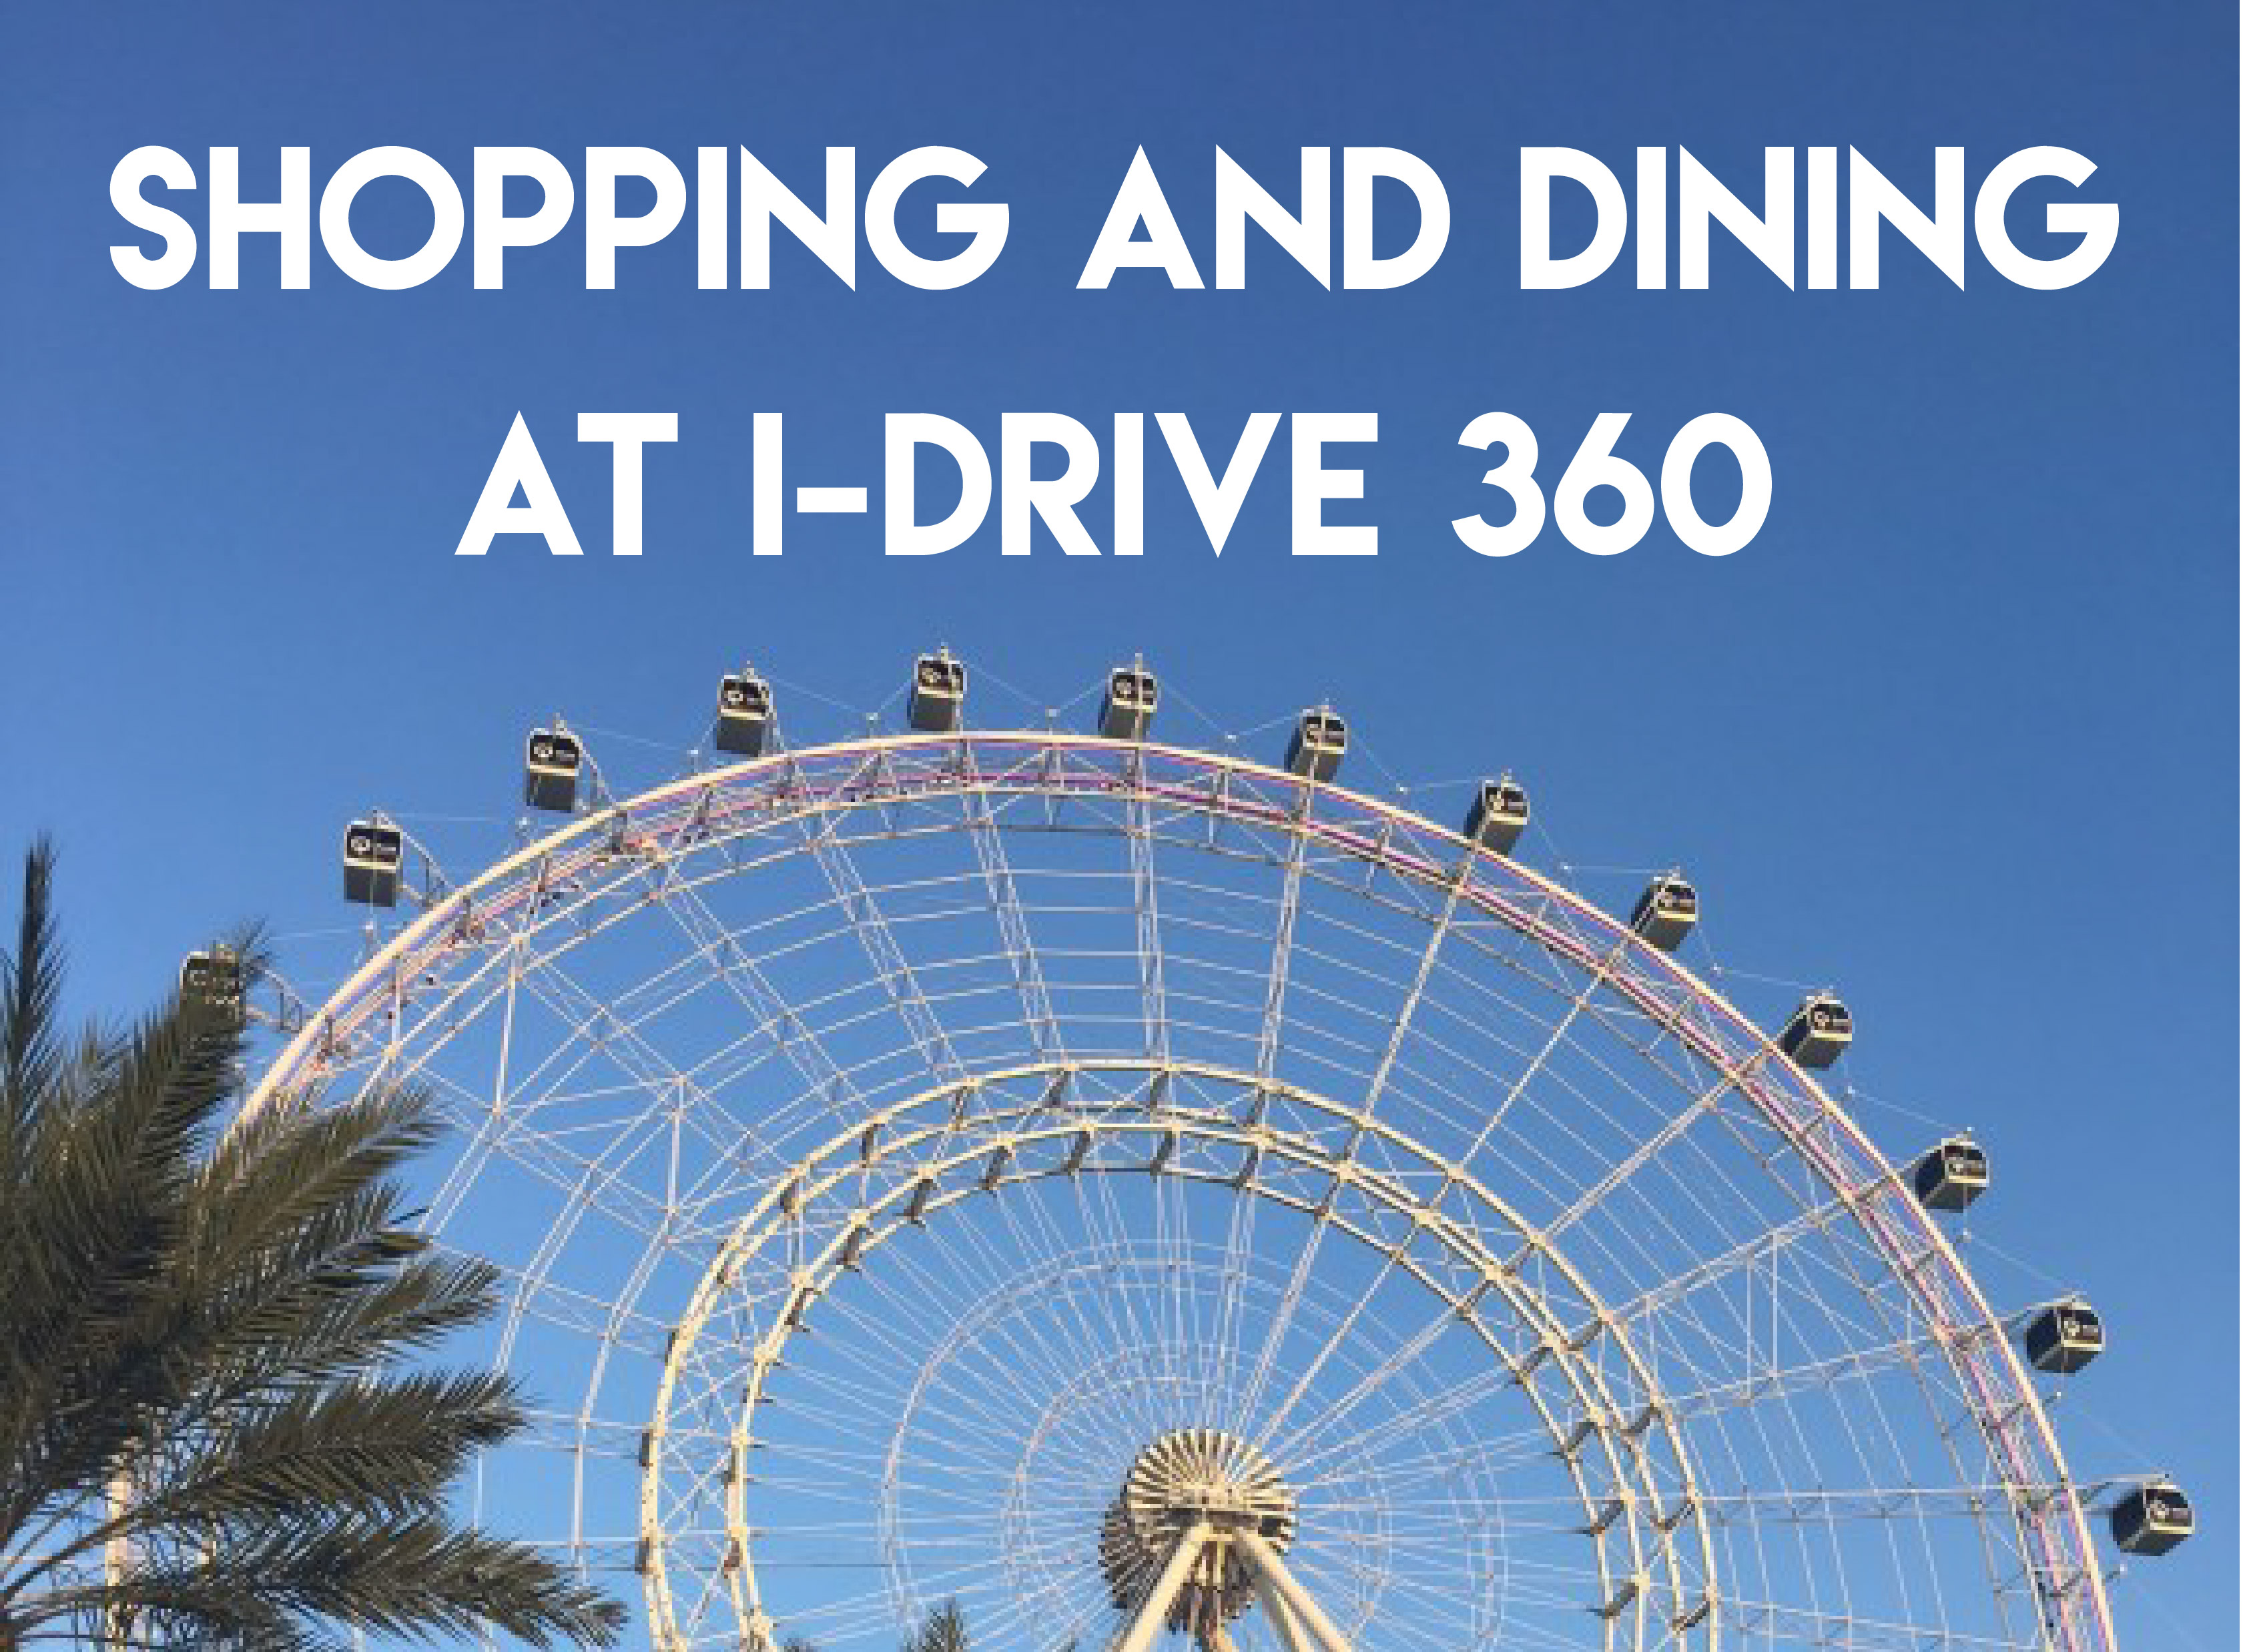 Shopping and dining at i-drive 360